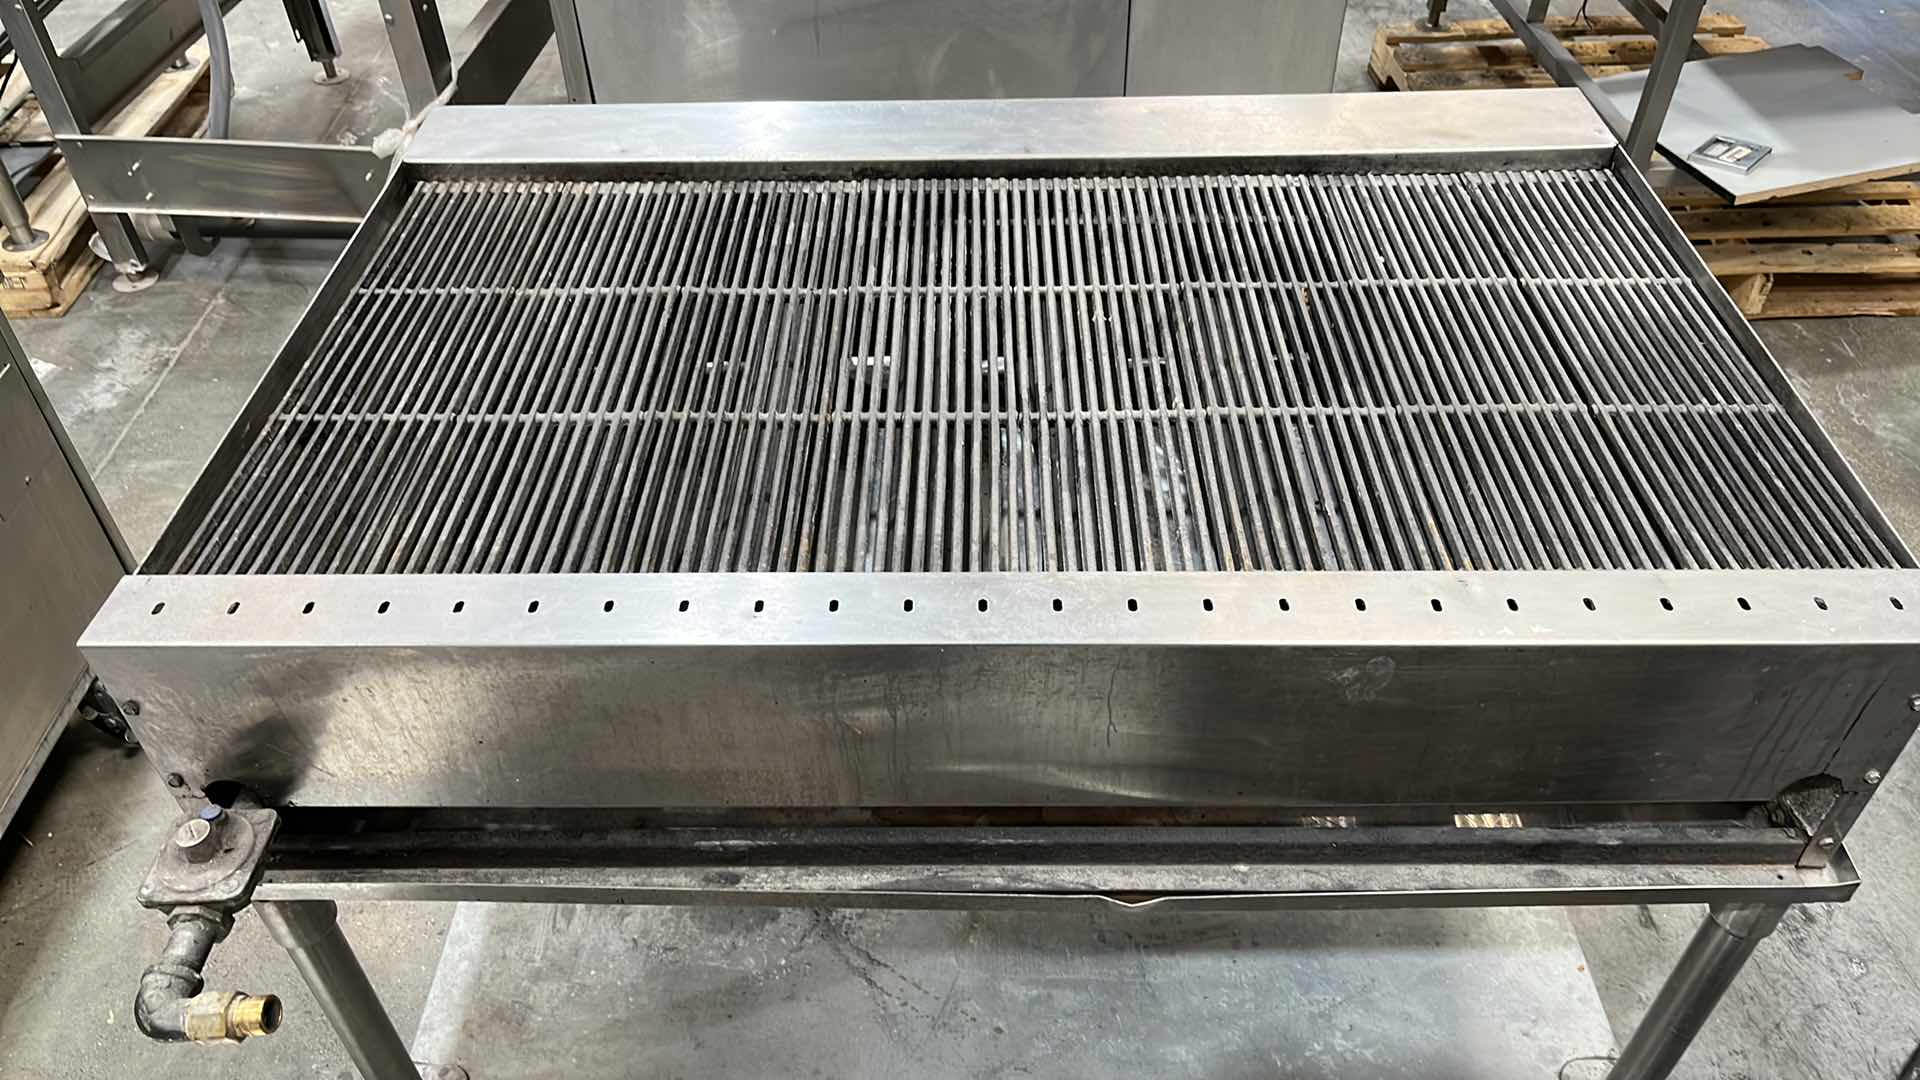 Photo 6 of IDEAL COMMERCIAL 8 BURNER GAS GRILL W STAND 32” X 48” H 36.5”